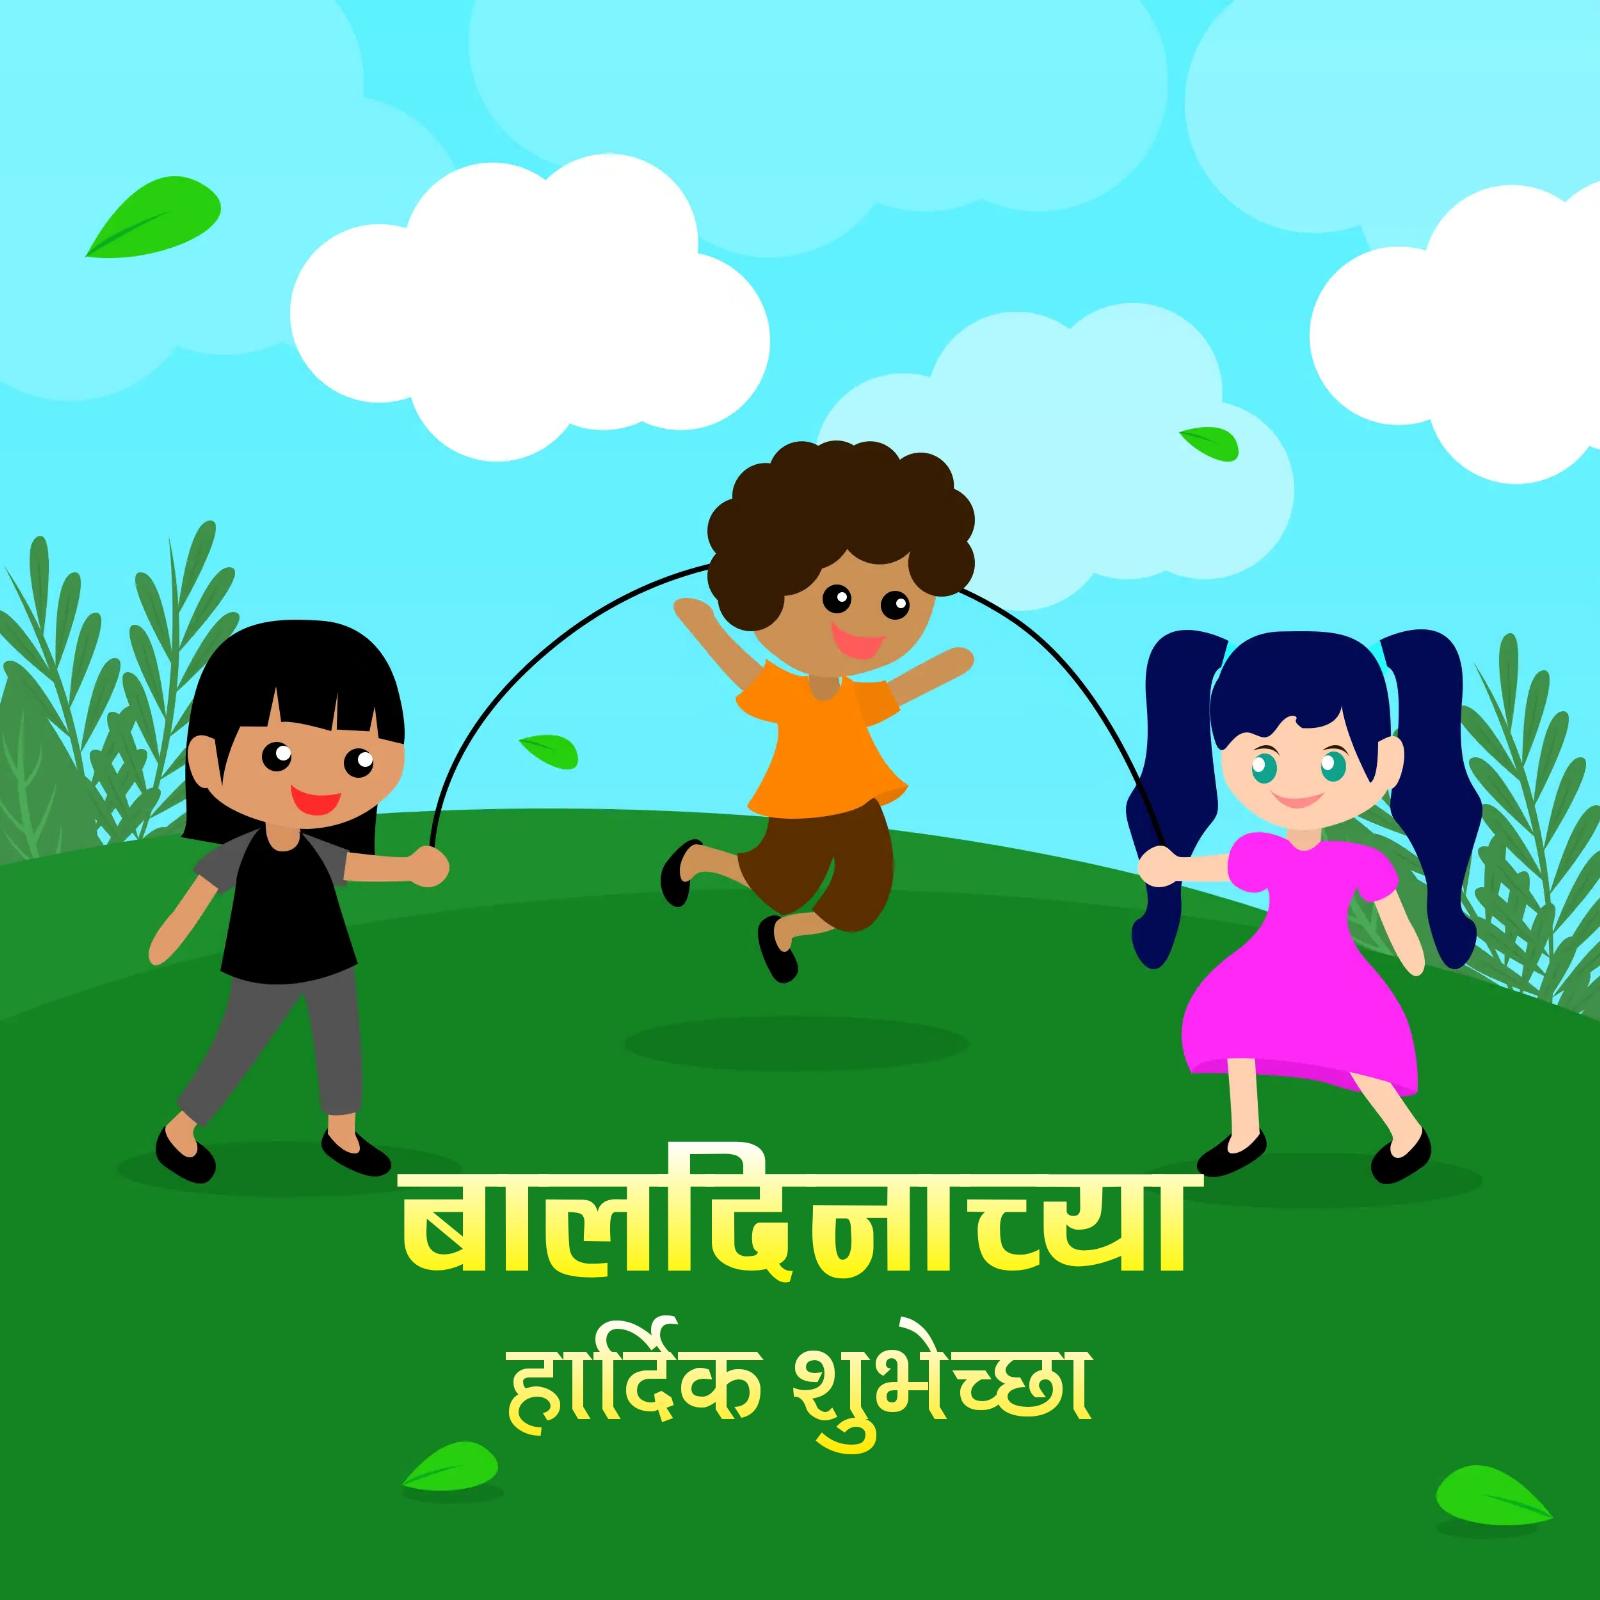 Happy Childrens Day Images In Marathi